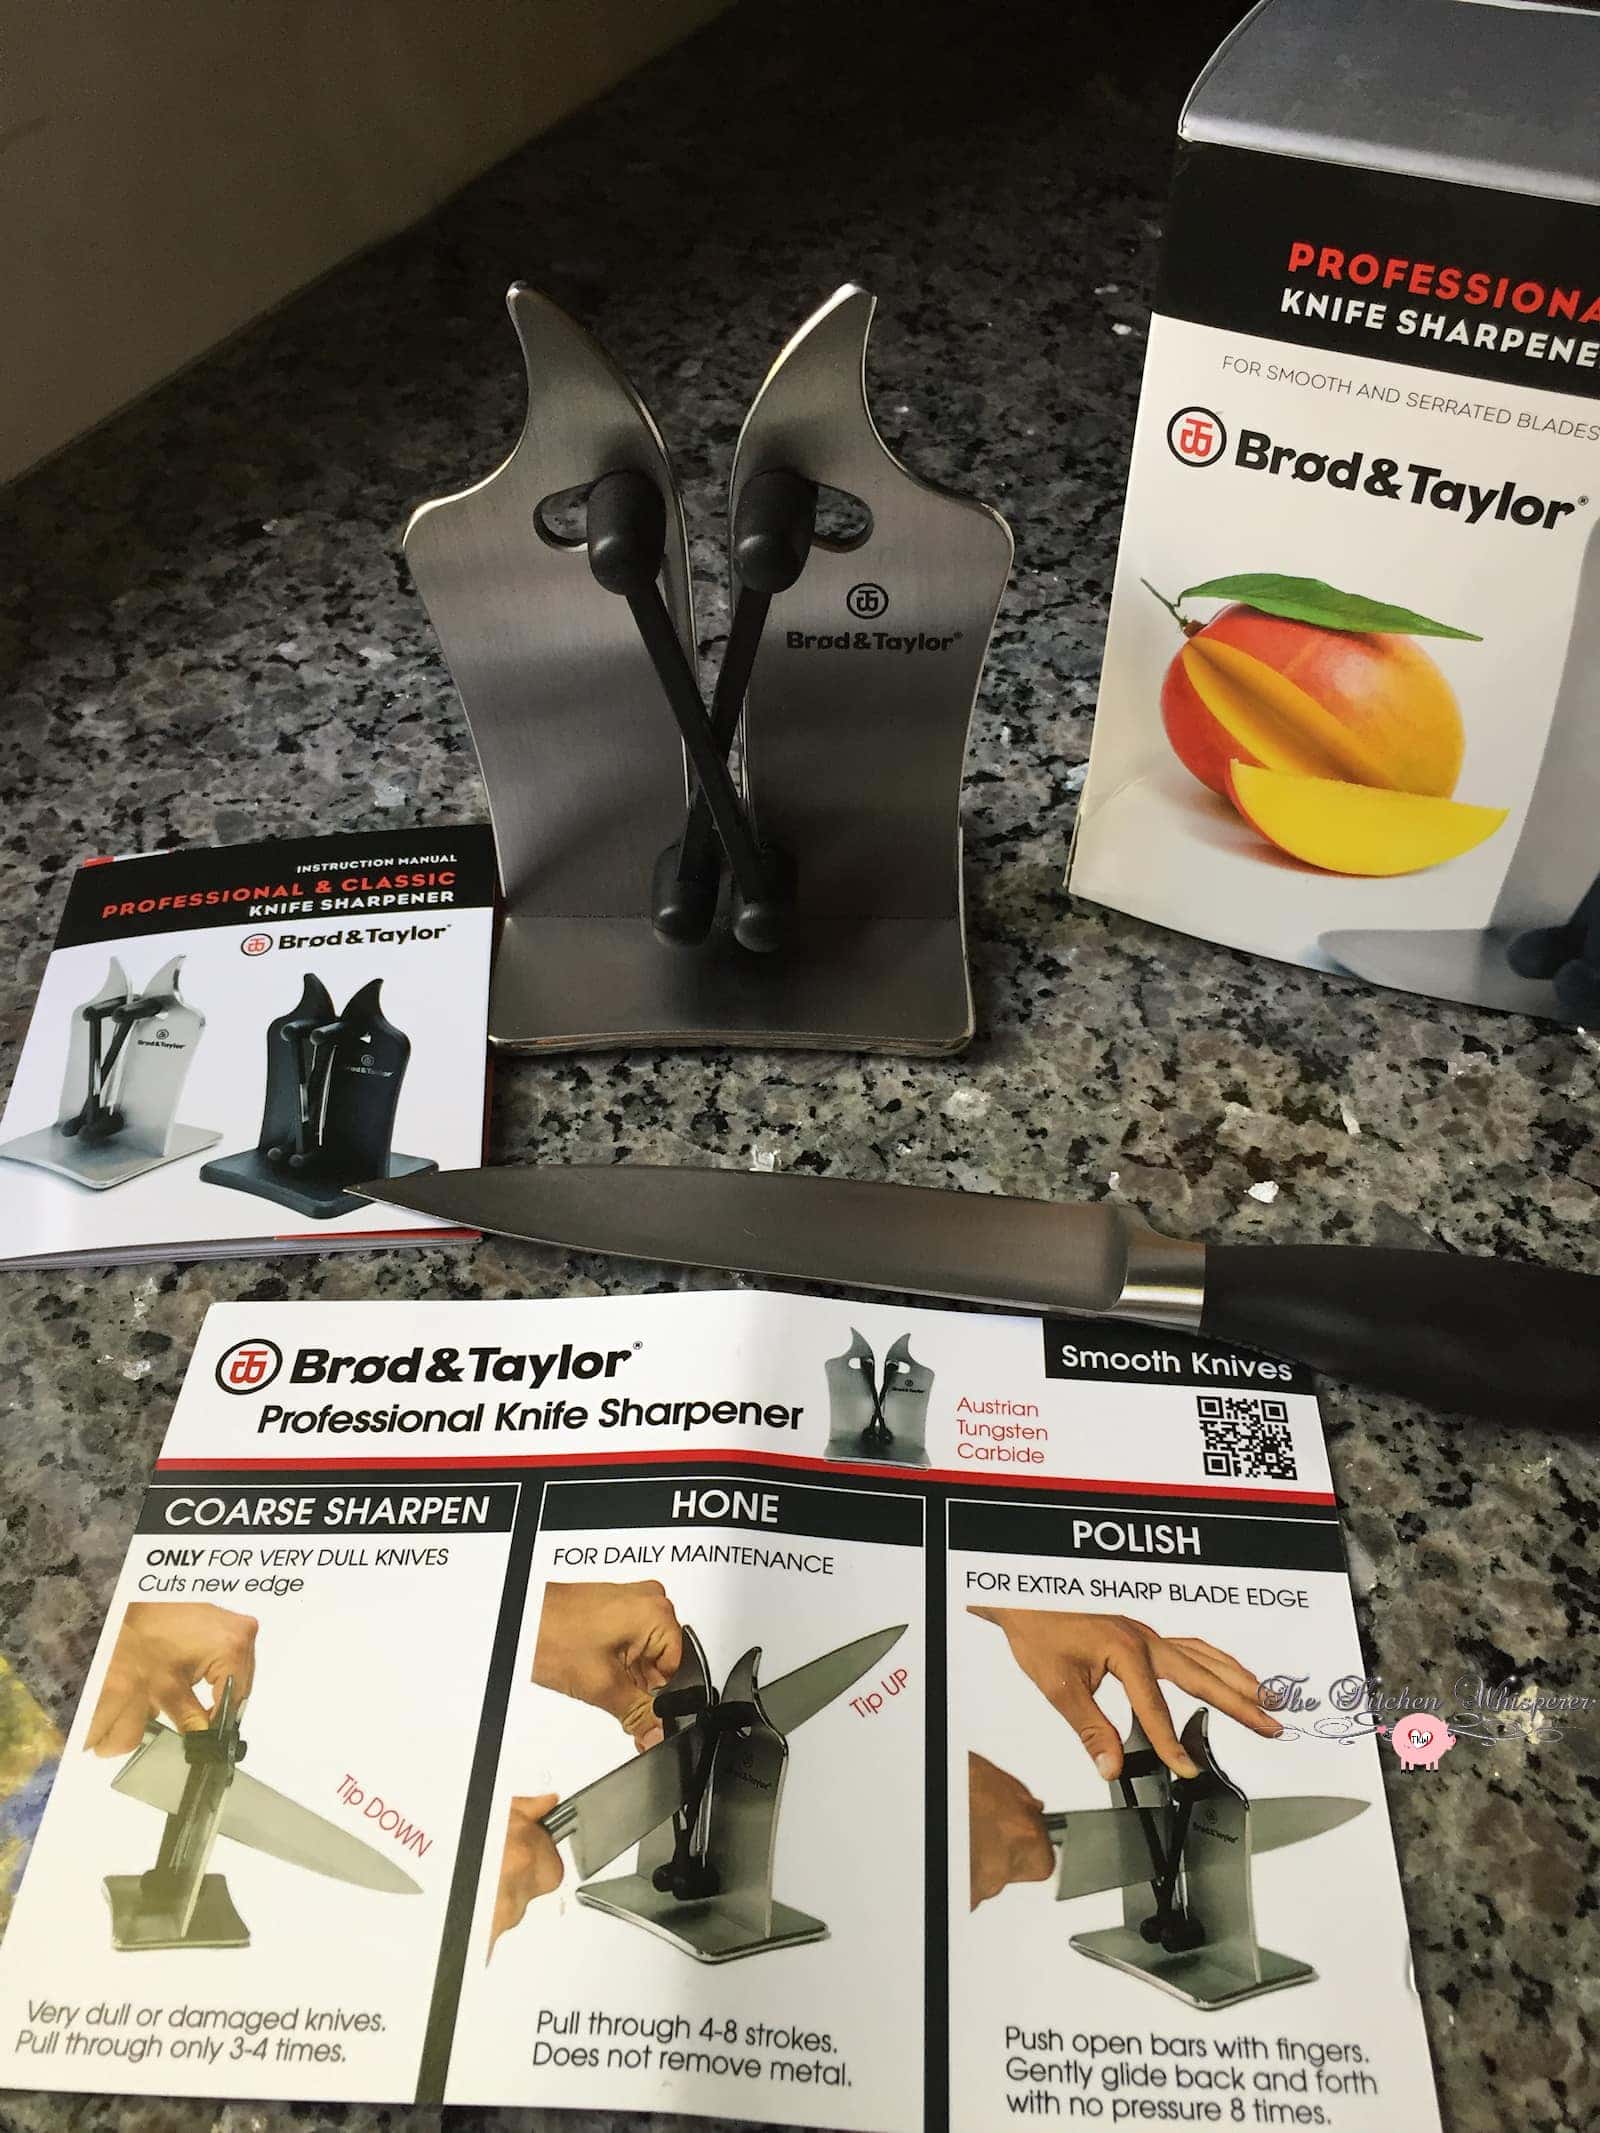 Every kitchen needs this – Brod & Taylor Professional Knife Sharpener